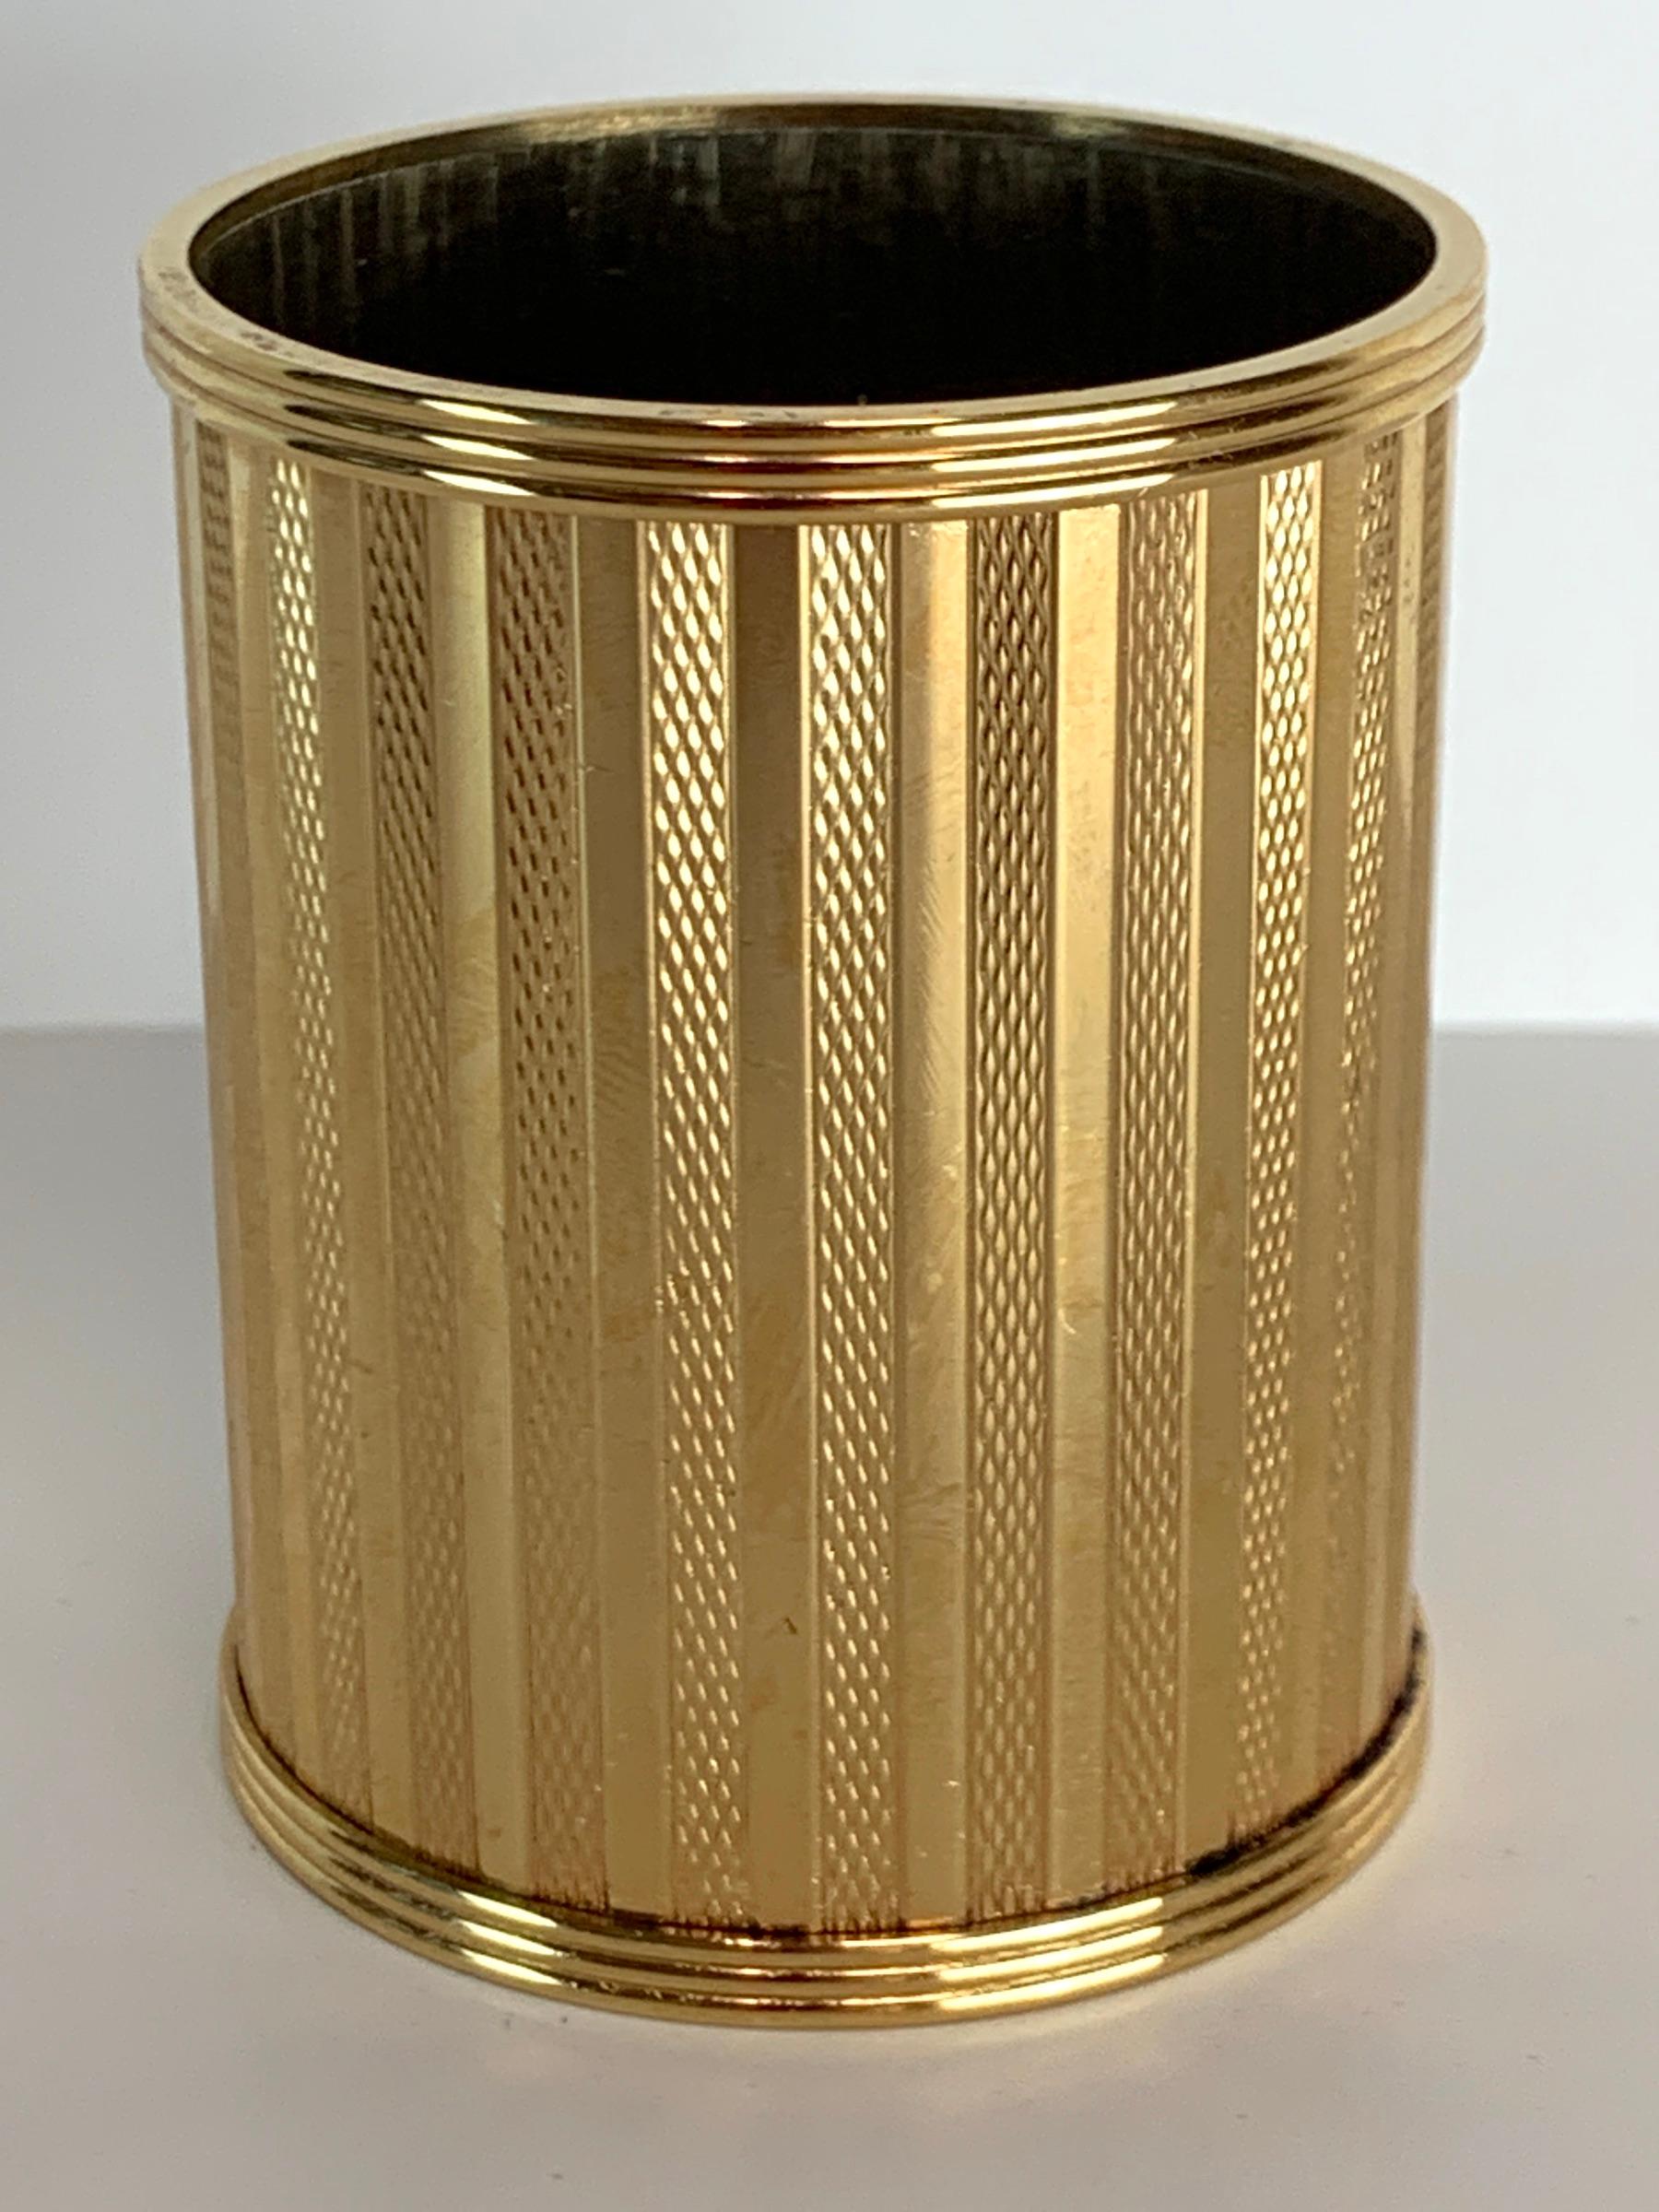 Dunhill gold-plated smoking stand, Paris, circa 1950, beautifully crafted, high quality, with continuous decoration solid and engine turned stripes, very heavy gold plating, presents beautifully.